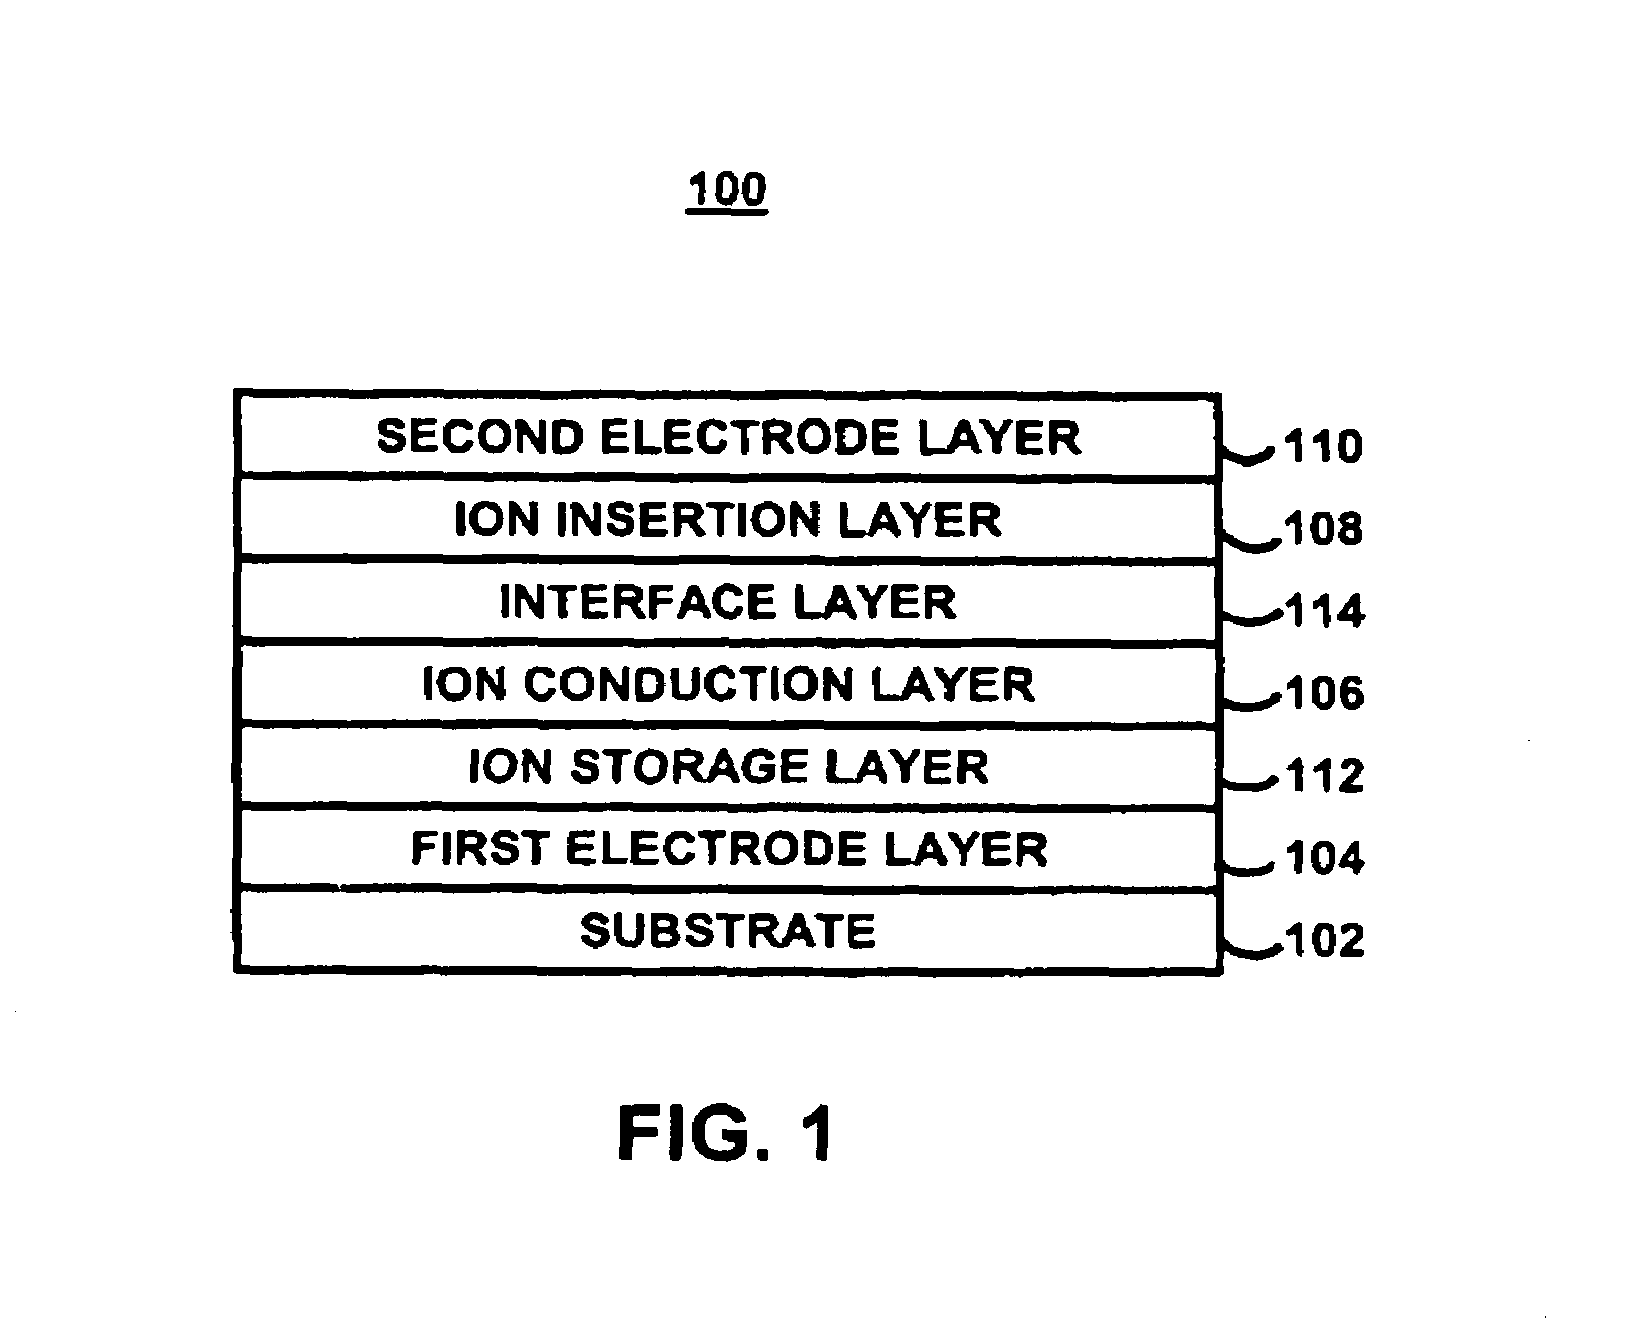 Apparatus and methods for modulating refractive index